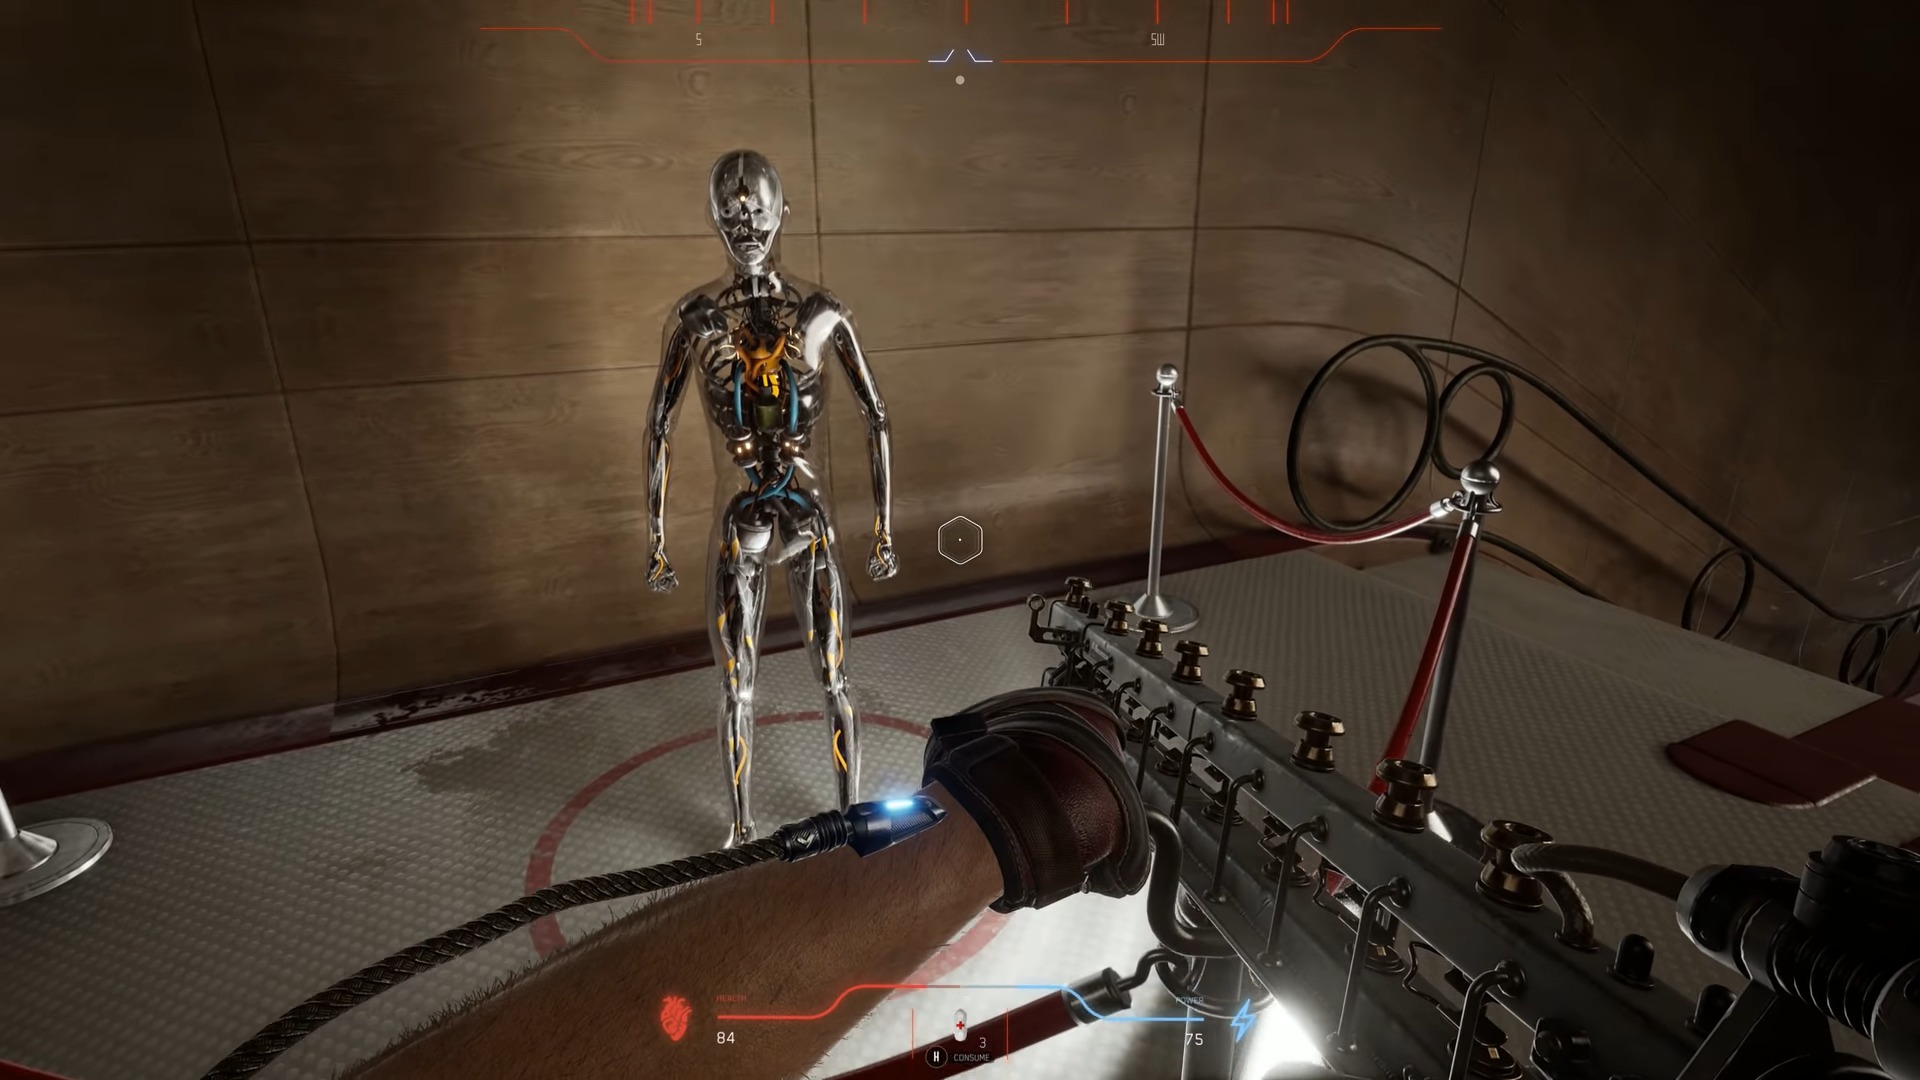 atomic heart ps4 performance